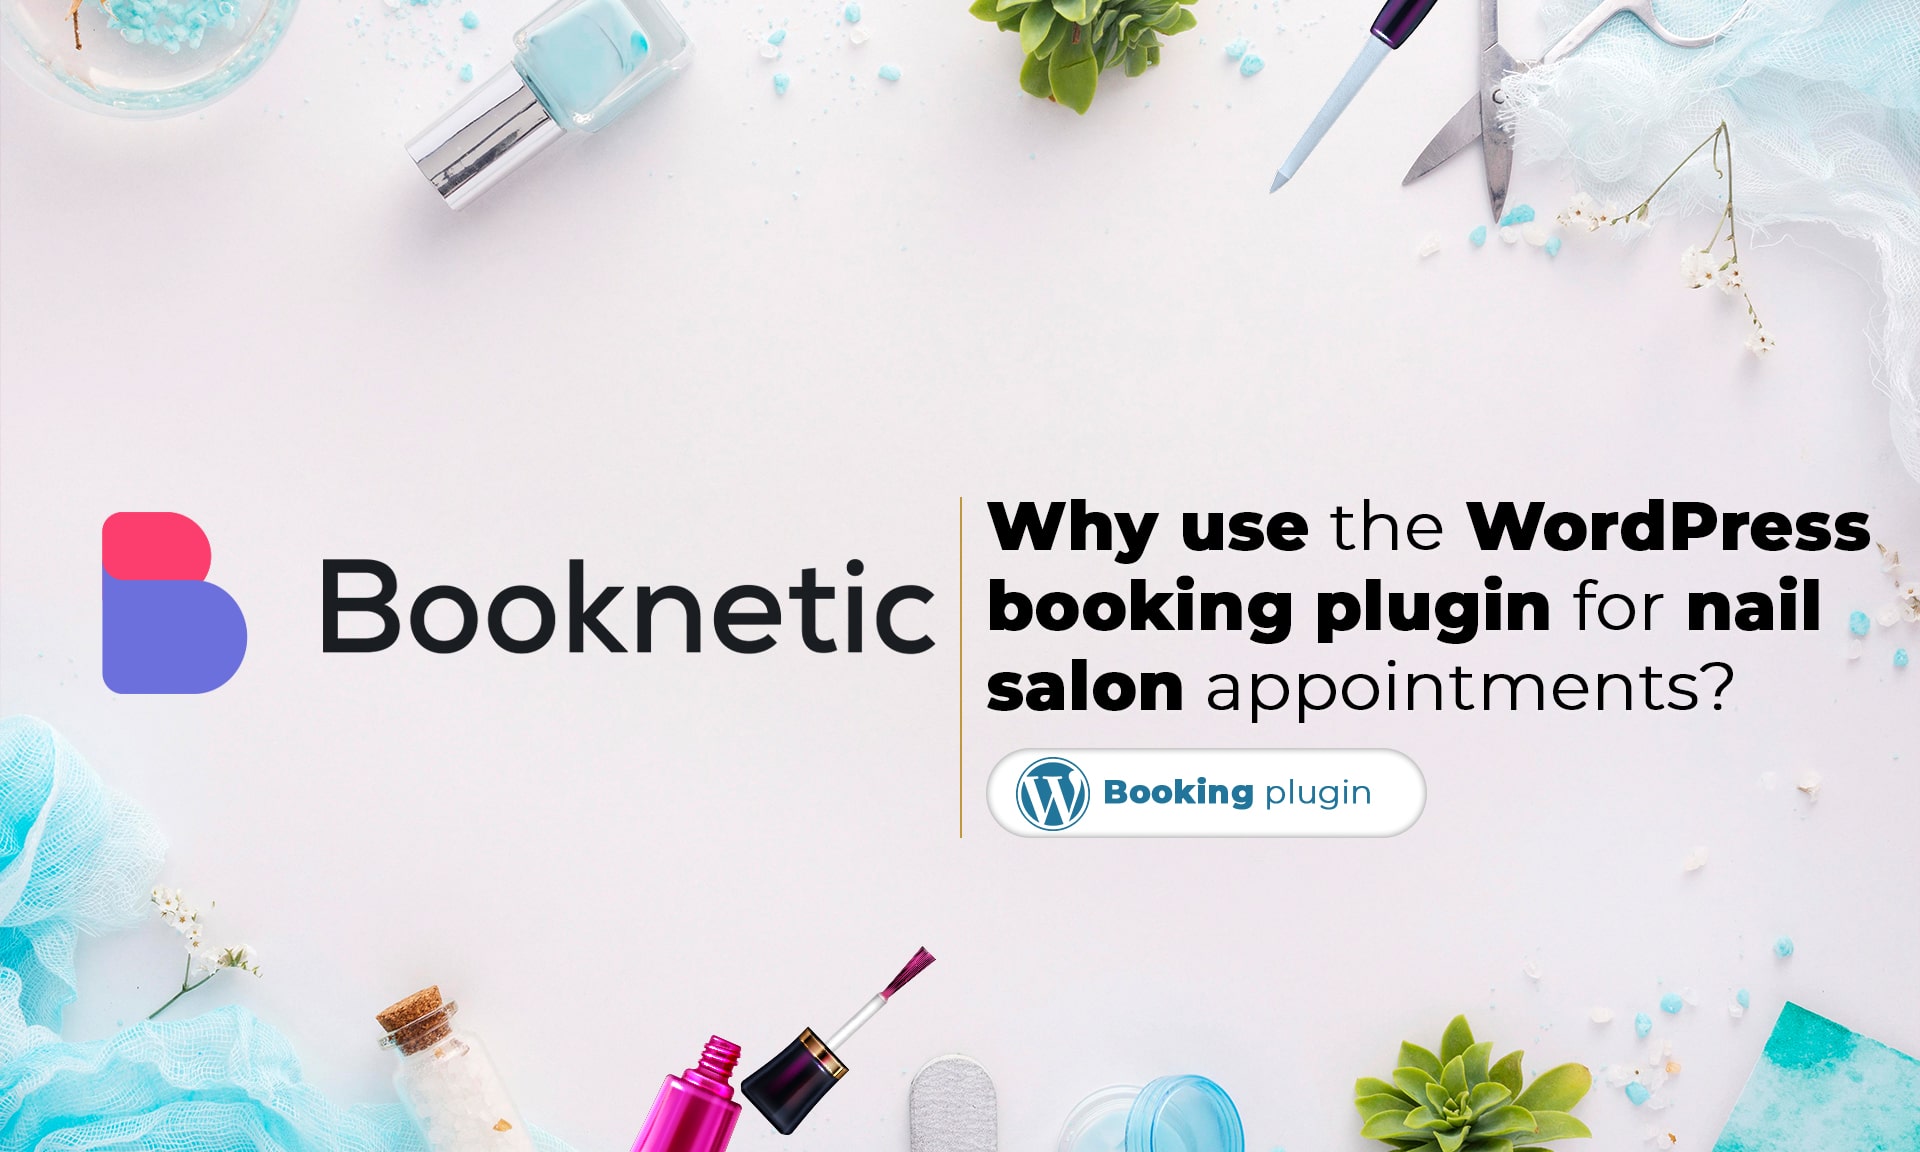 Why Use the WordPress Booking Plugin for Nail Salon Appointments?